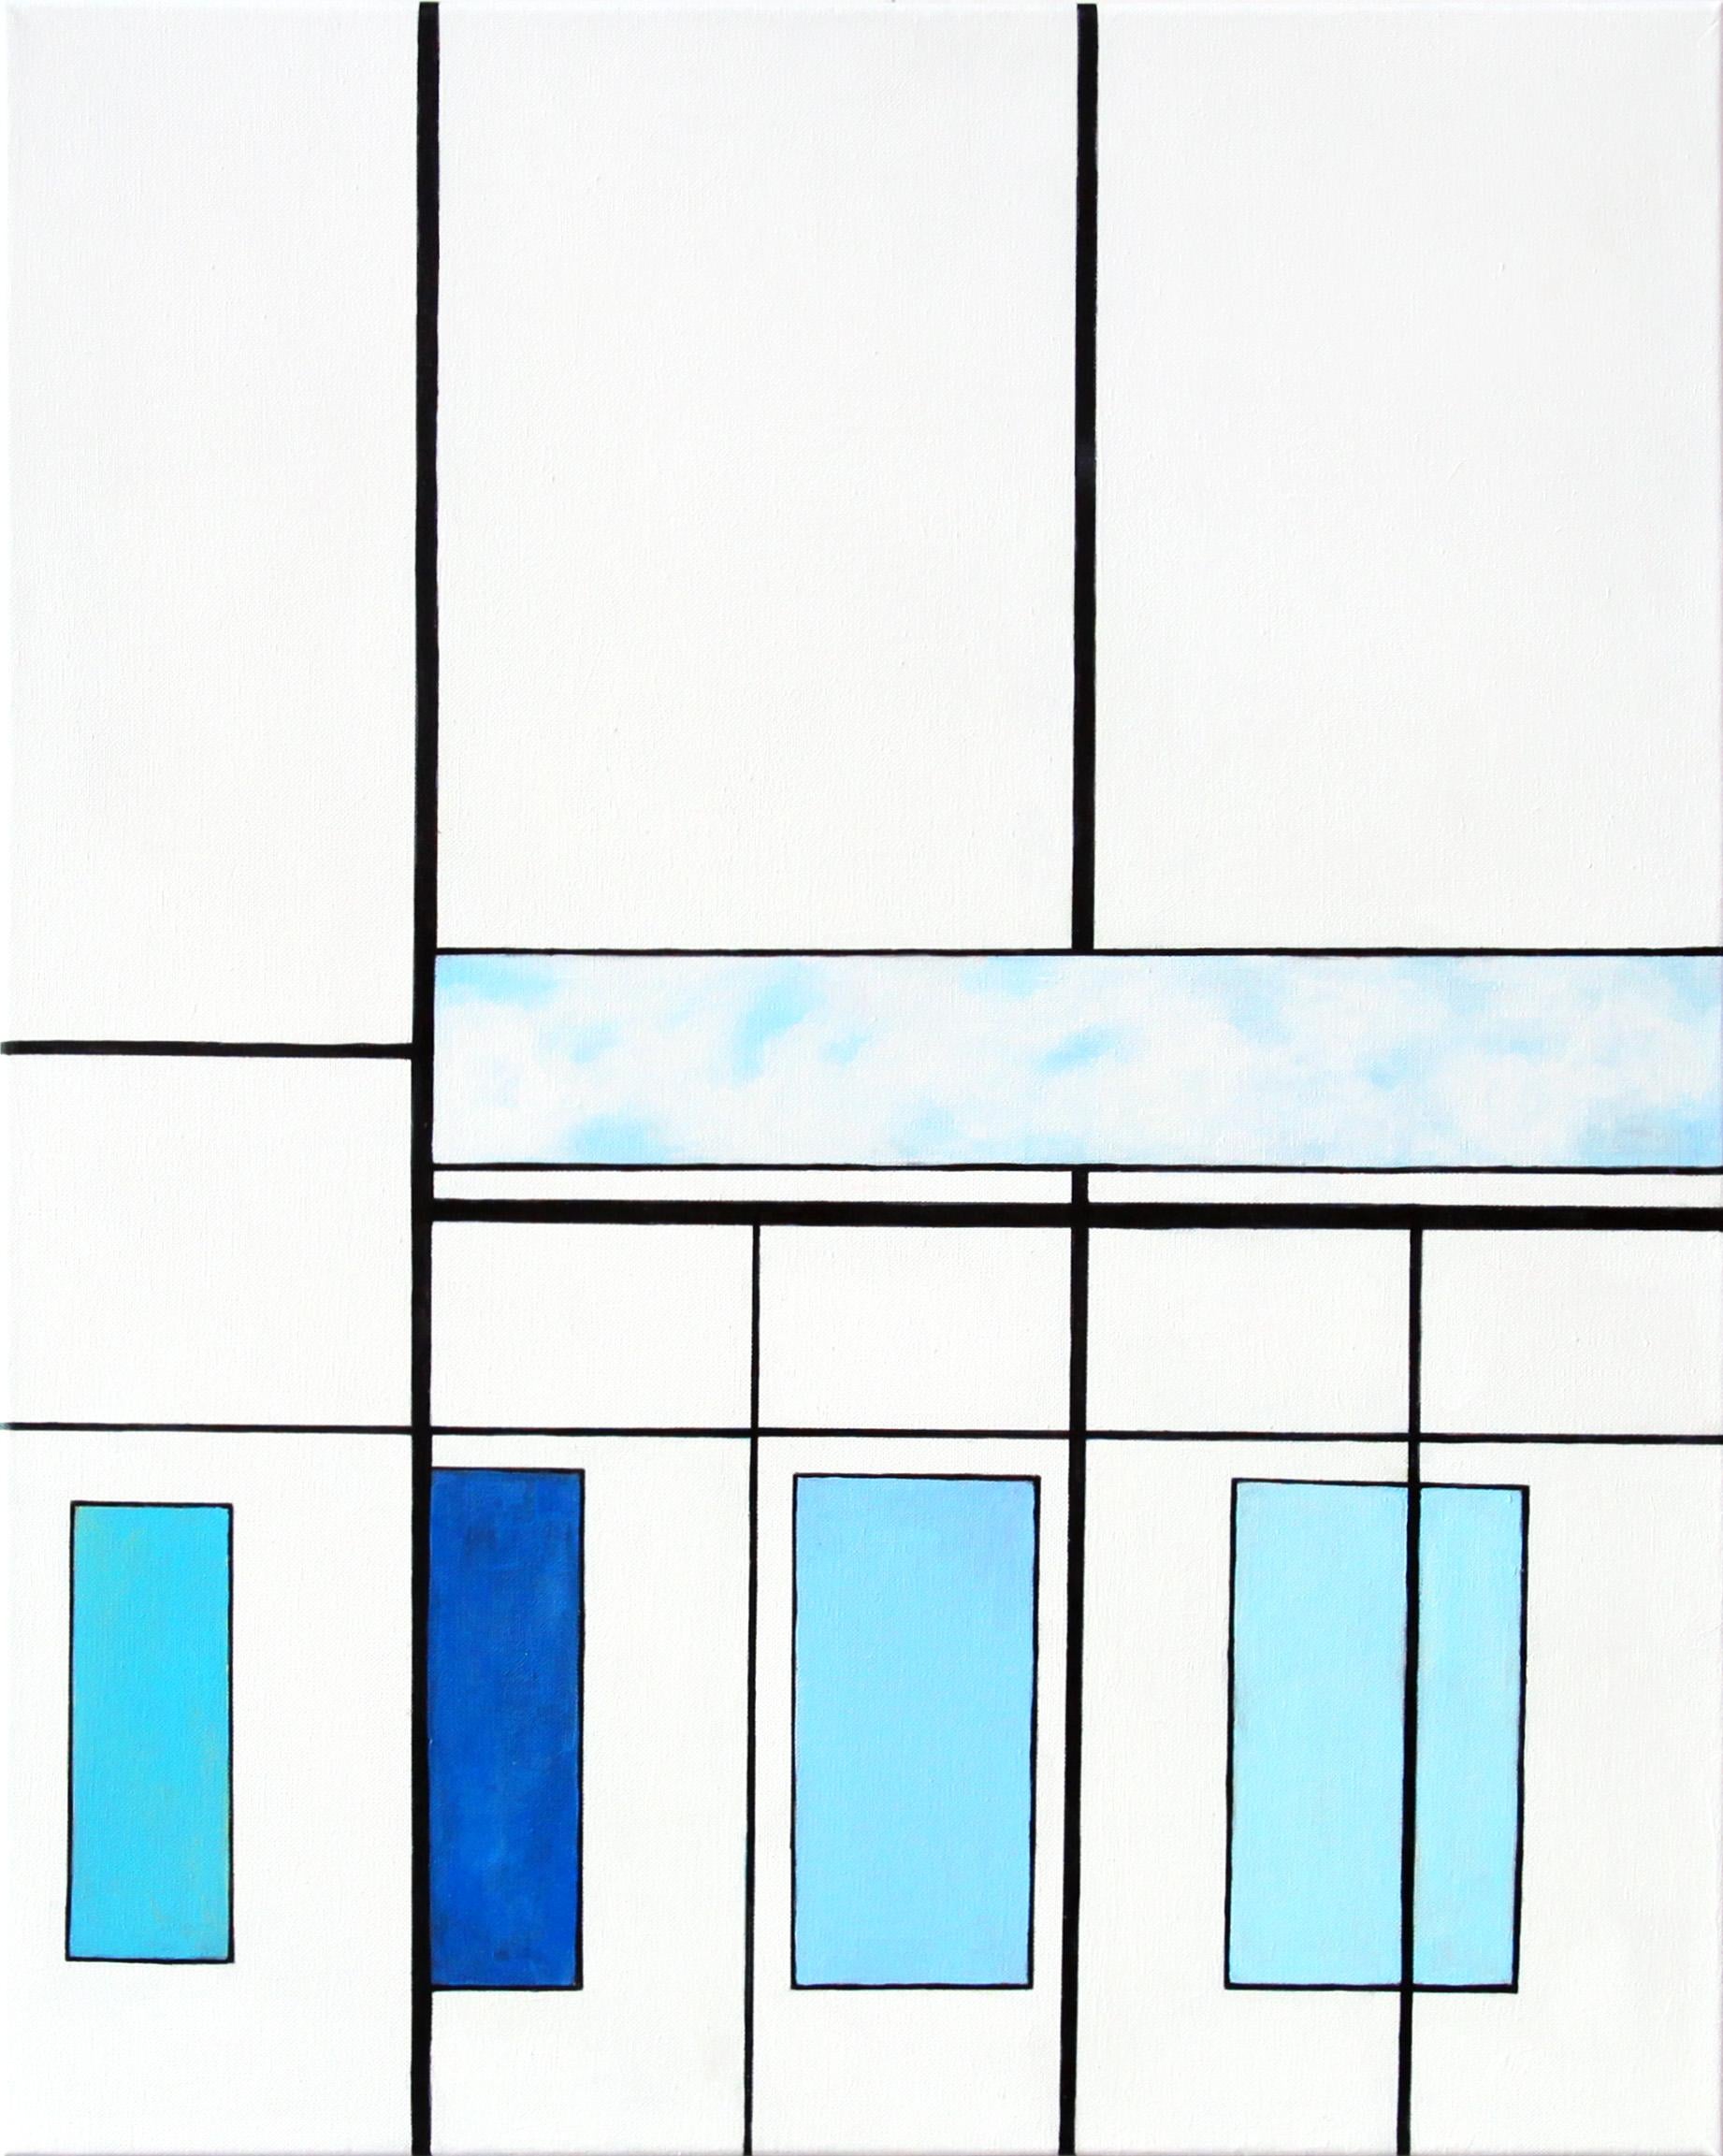 Stefanie Bales Abstract Painting - An Abstract Minimalistic Acrylic on Canvas Painting, "Reflections"